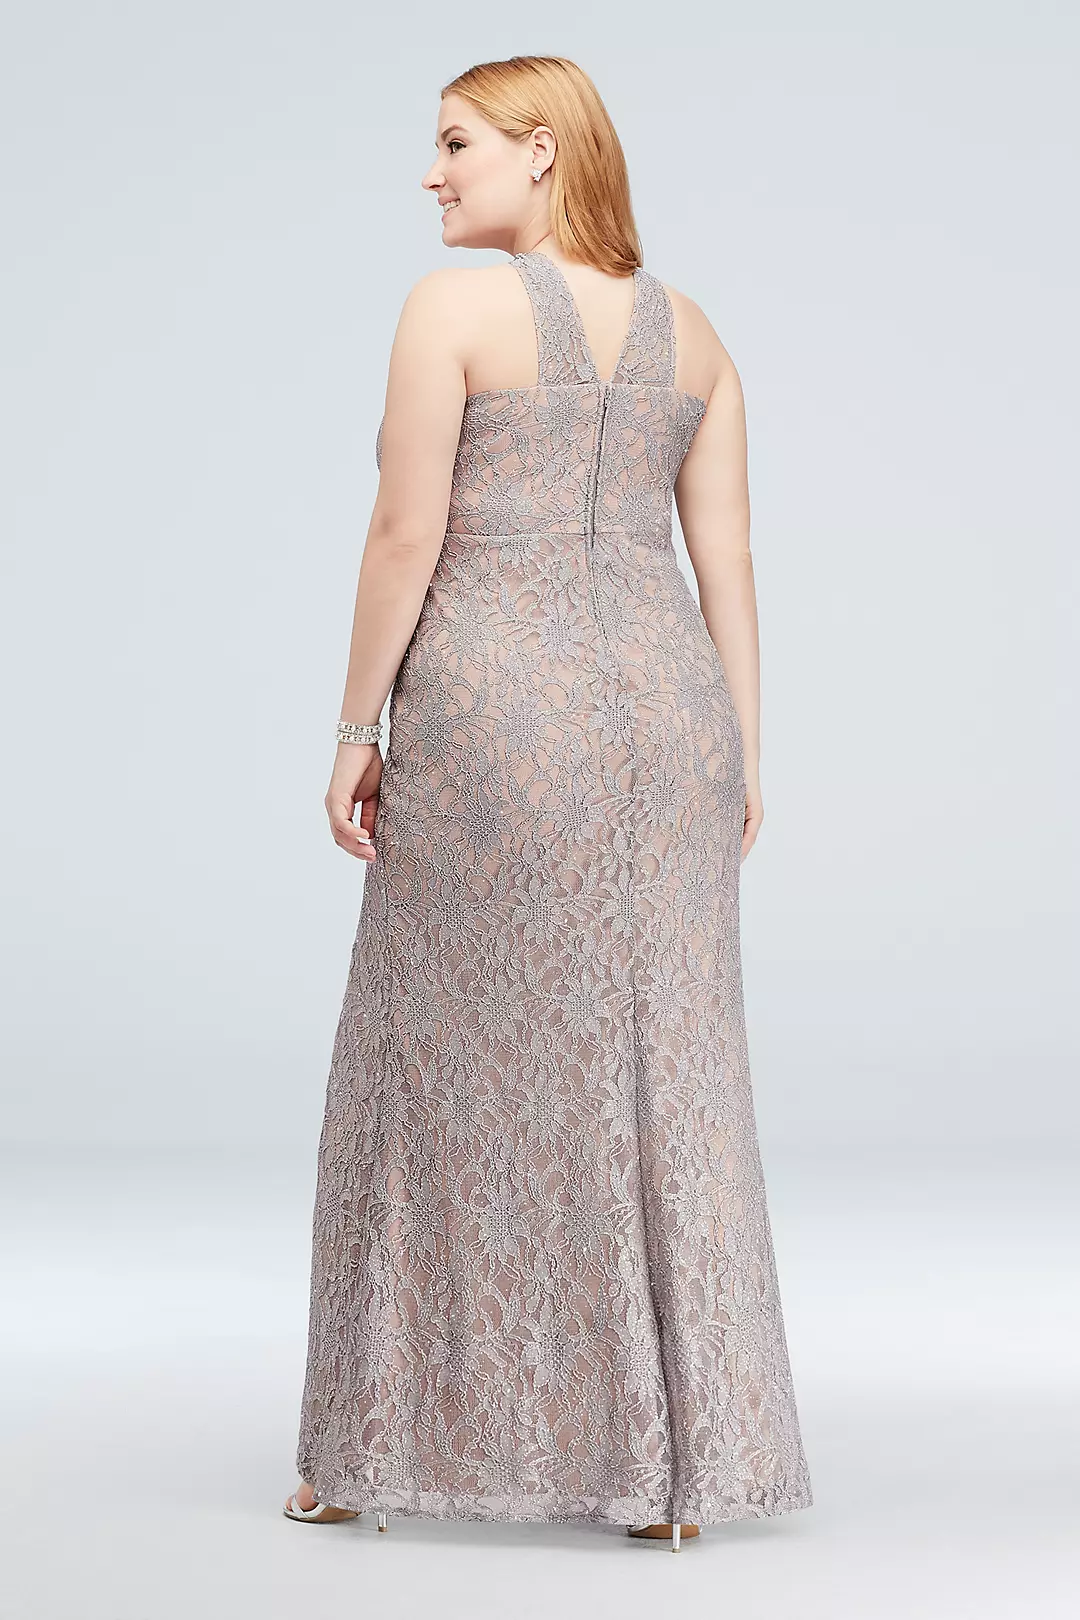 Glitter Lace Halter Sheath Gown with Beaded Belt Image 2